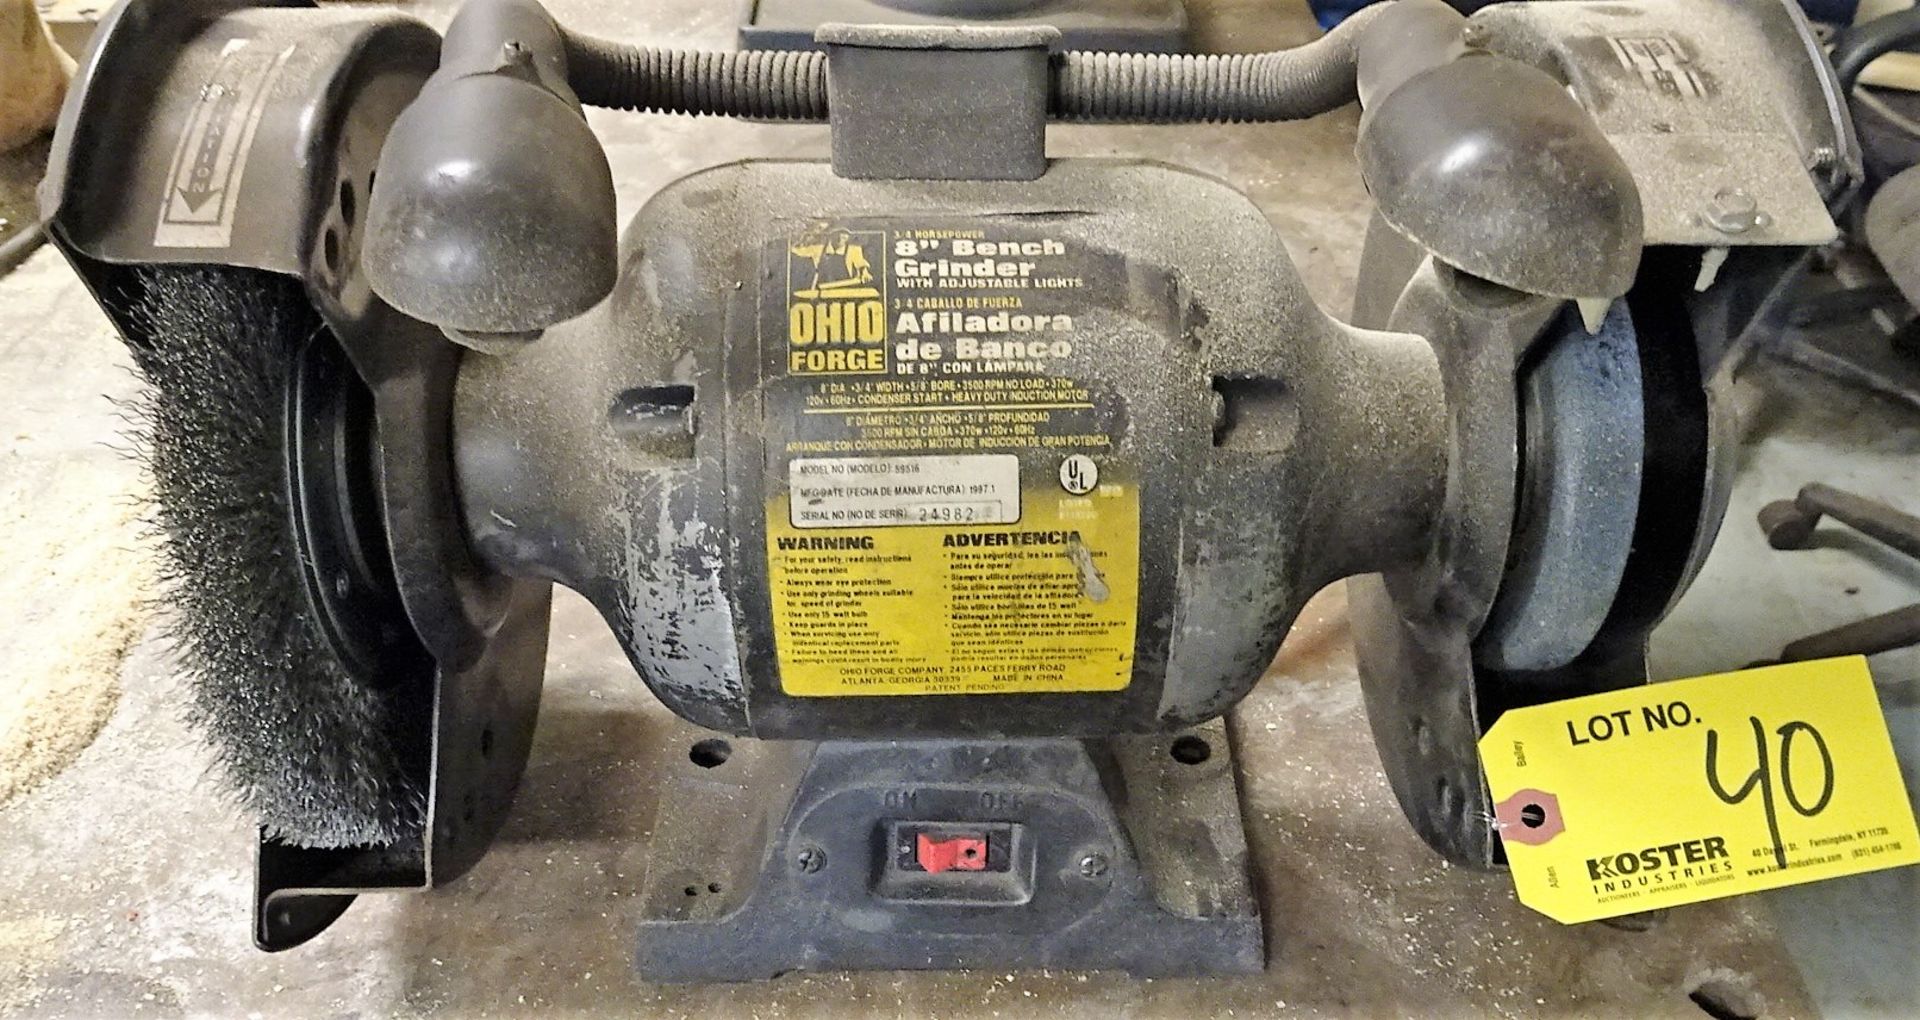 OHIO FORGE 8" DOUBLE-ENDED BENCH GRINDER